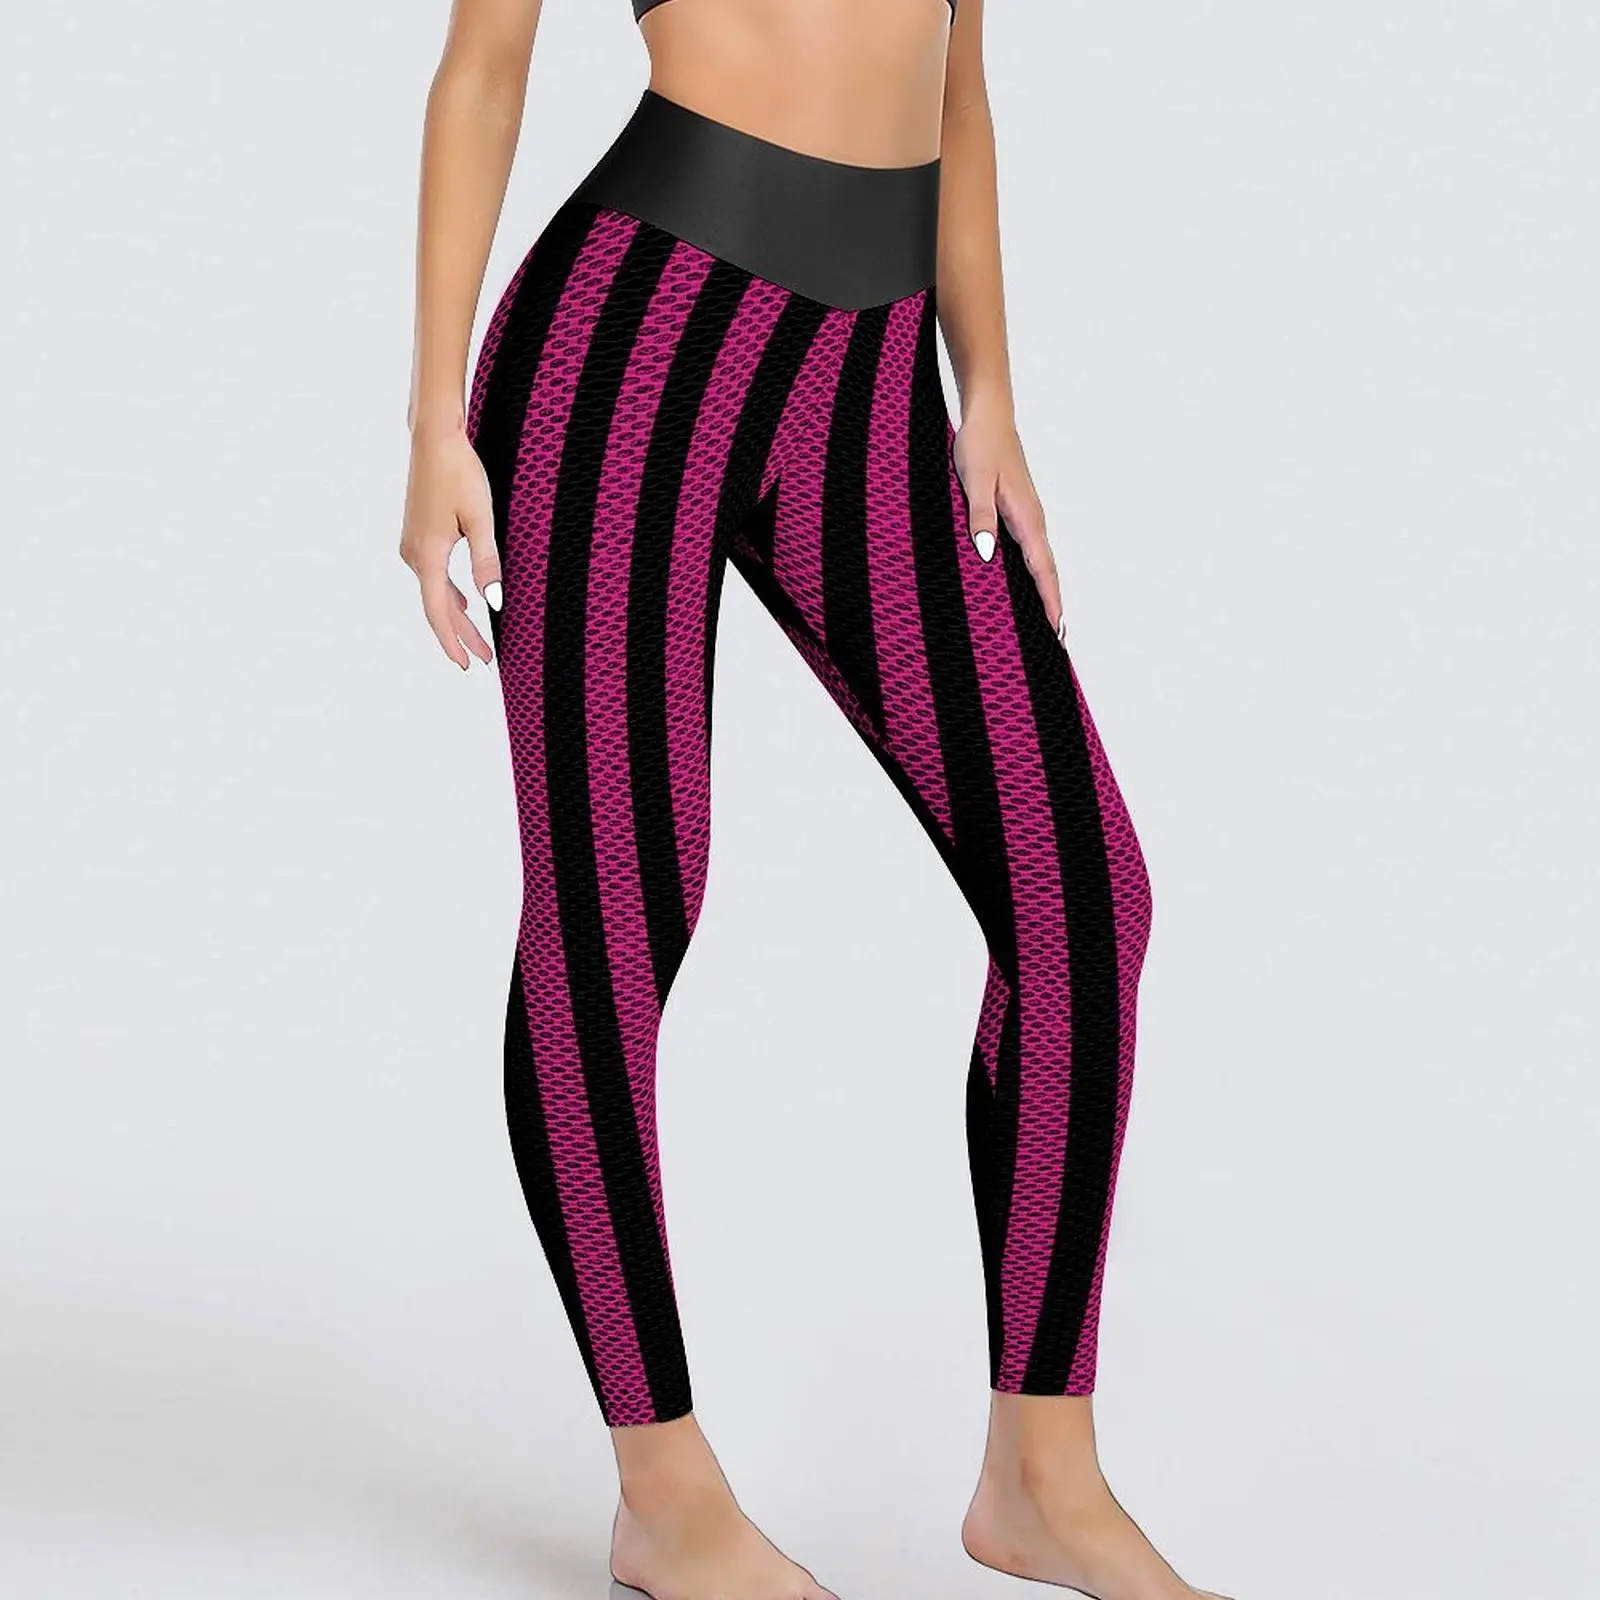 Vertical Striped Leggings Black And Purple Fitness Gym Yoga Pants Women Push Up Cute Leggins Sexy Seamless Graphic Sports Tights